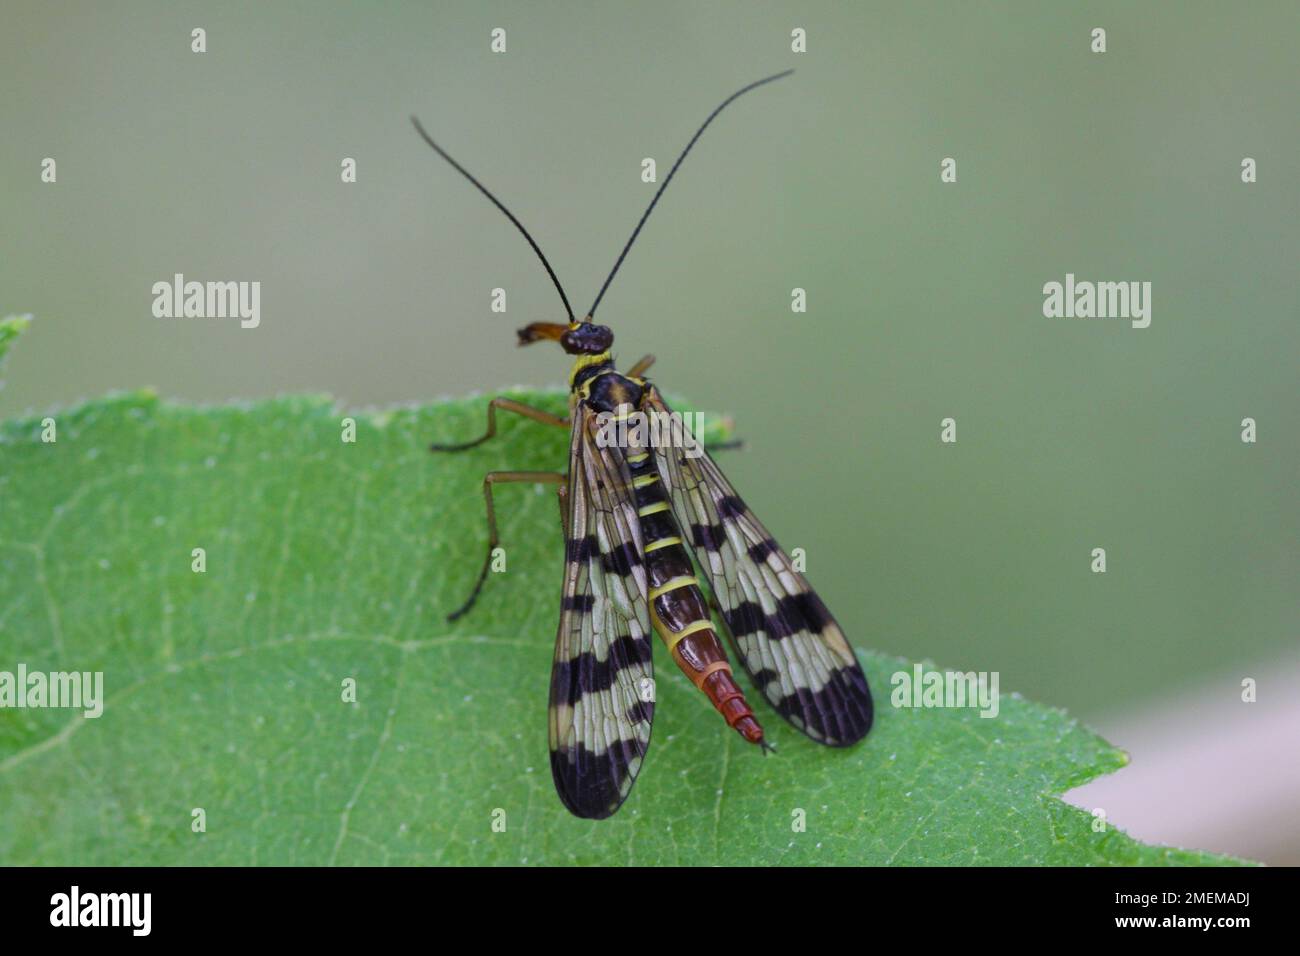 Panorpa communis is the common scorpionfly a species of scorpionfly. It’s are useful insects that eat plant pests. Stock Photo